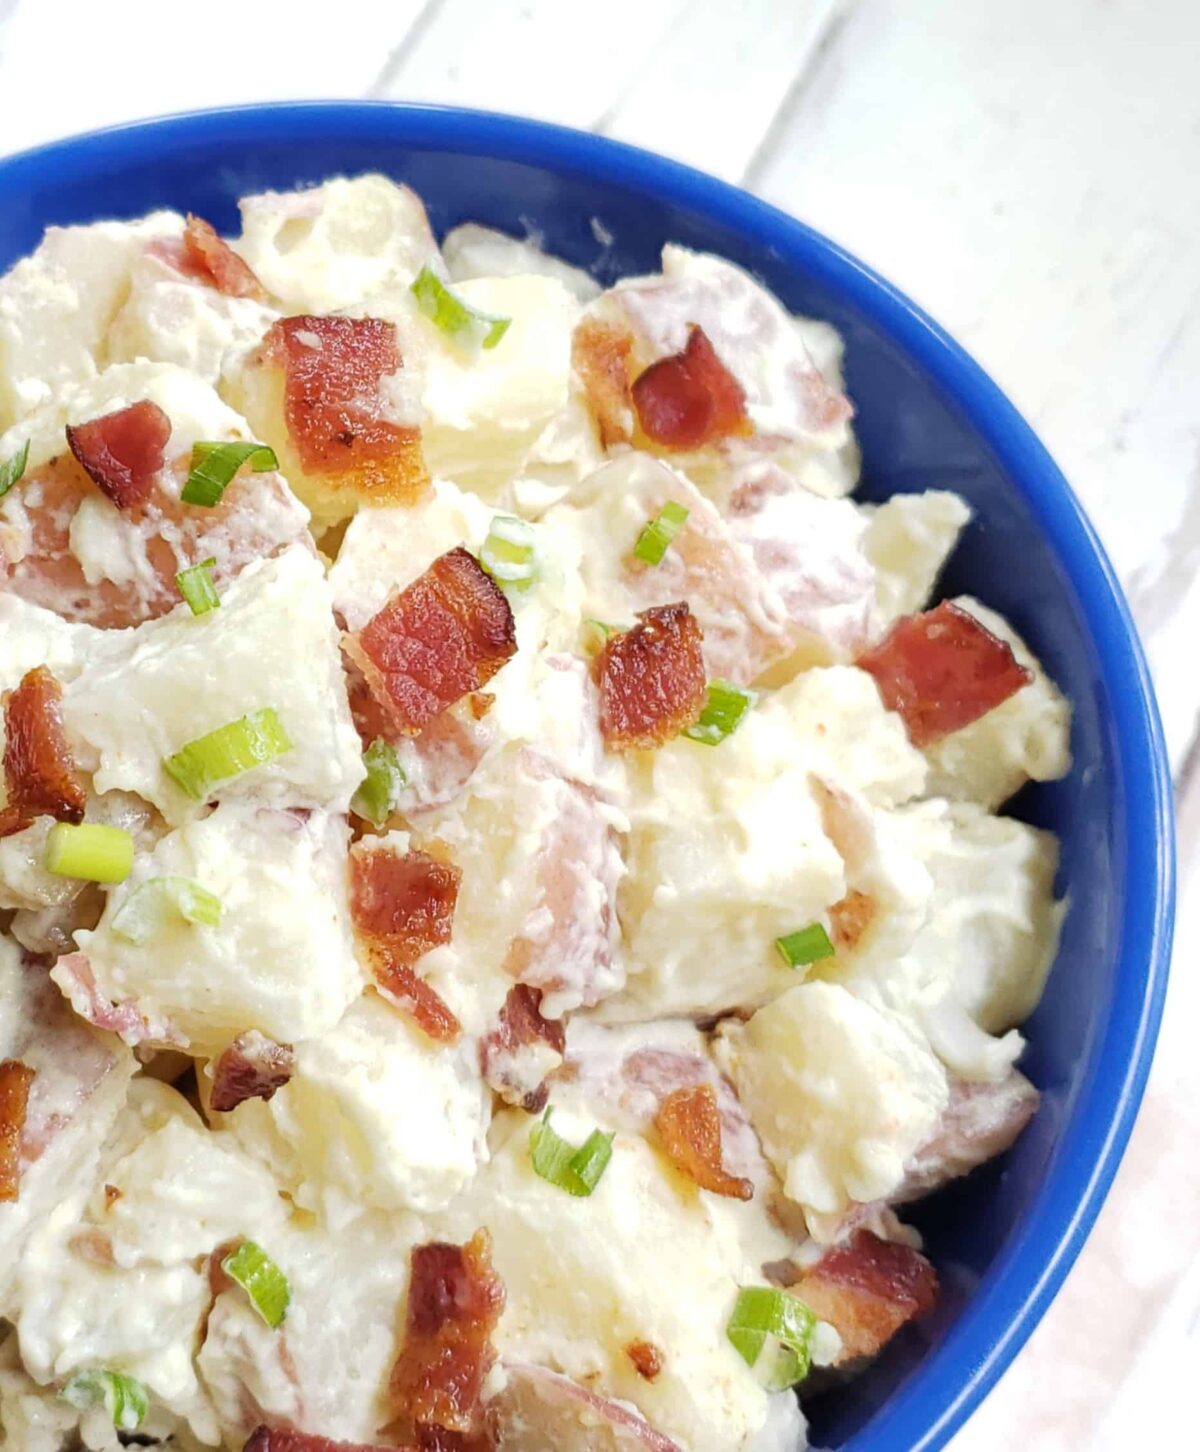 Sour Cream and Green Onion Potato Salad with Bacon